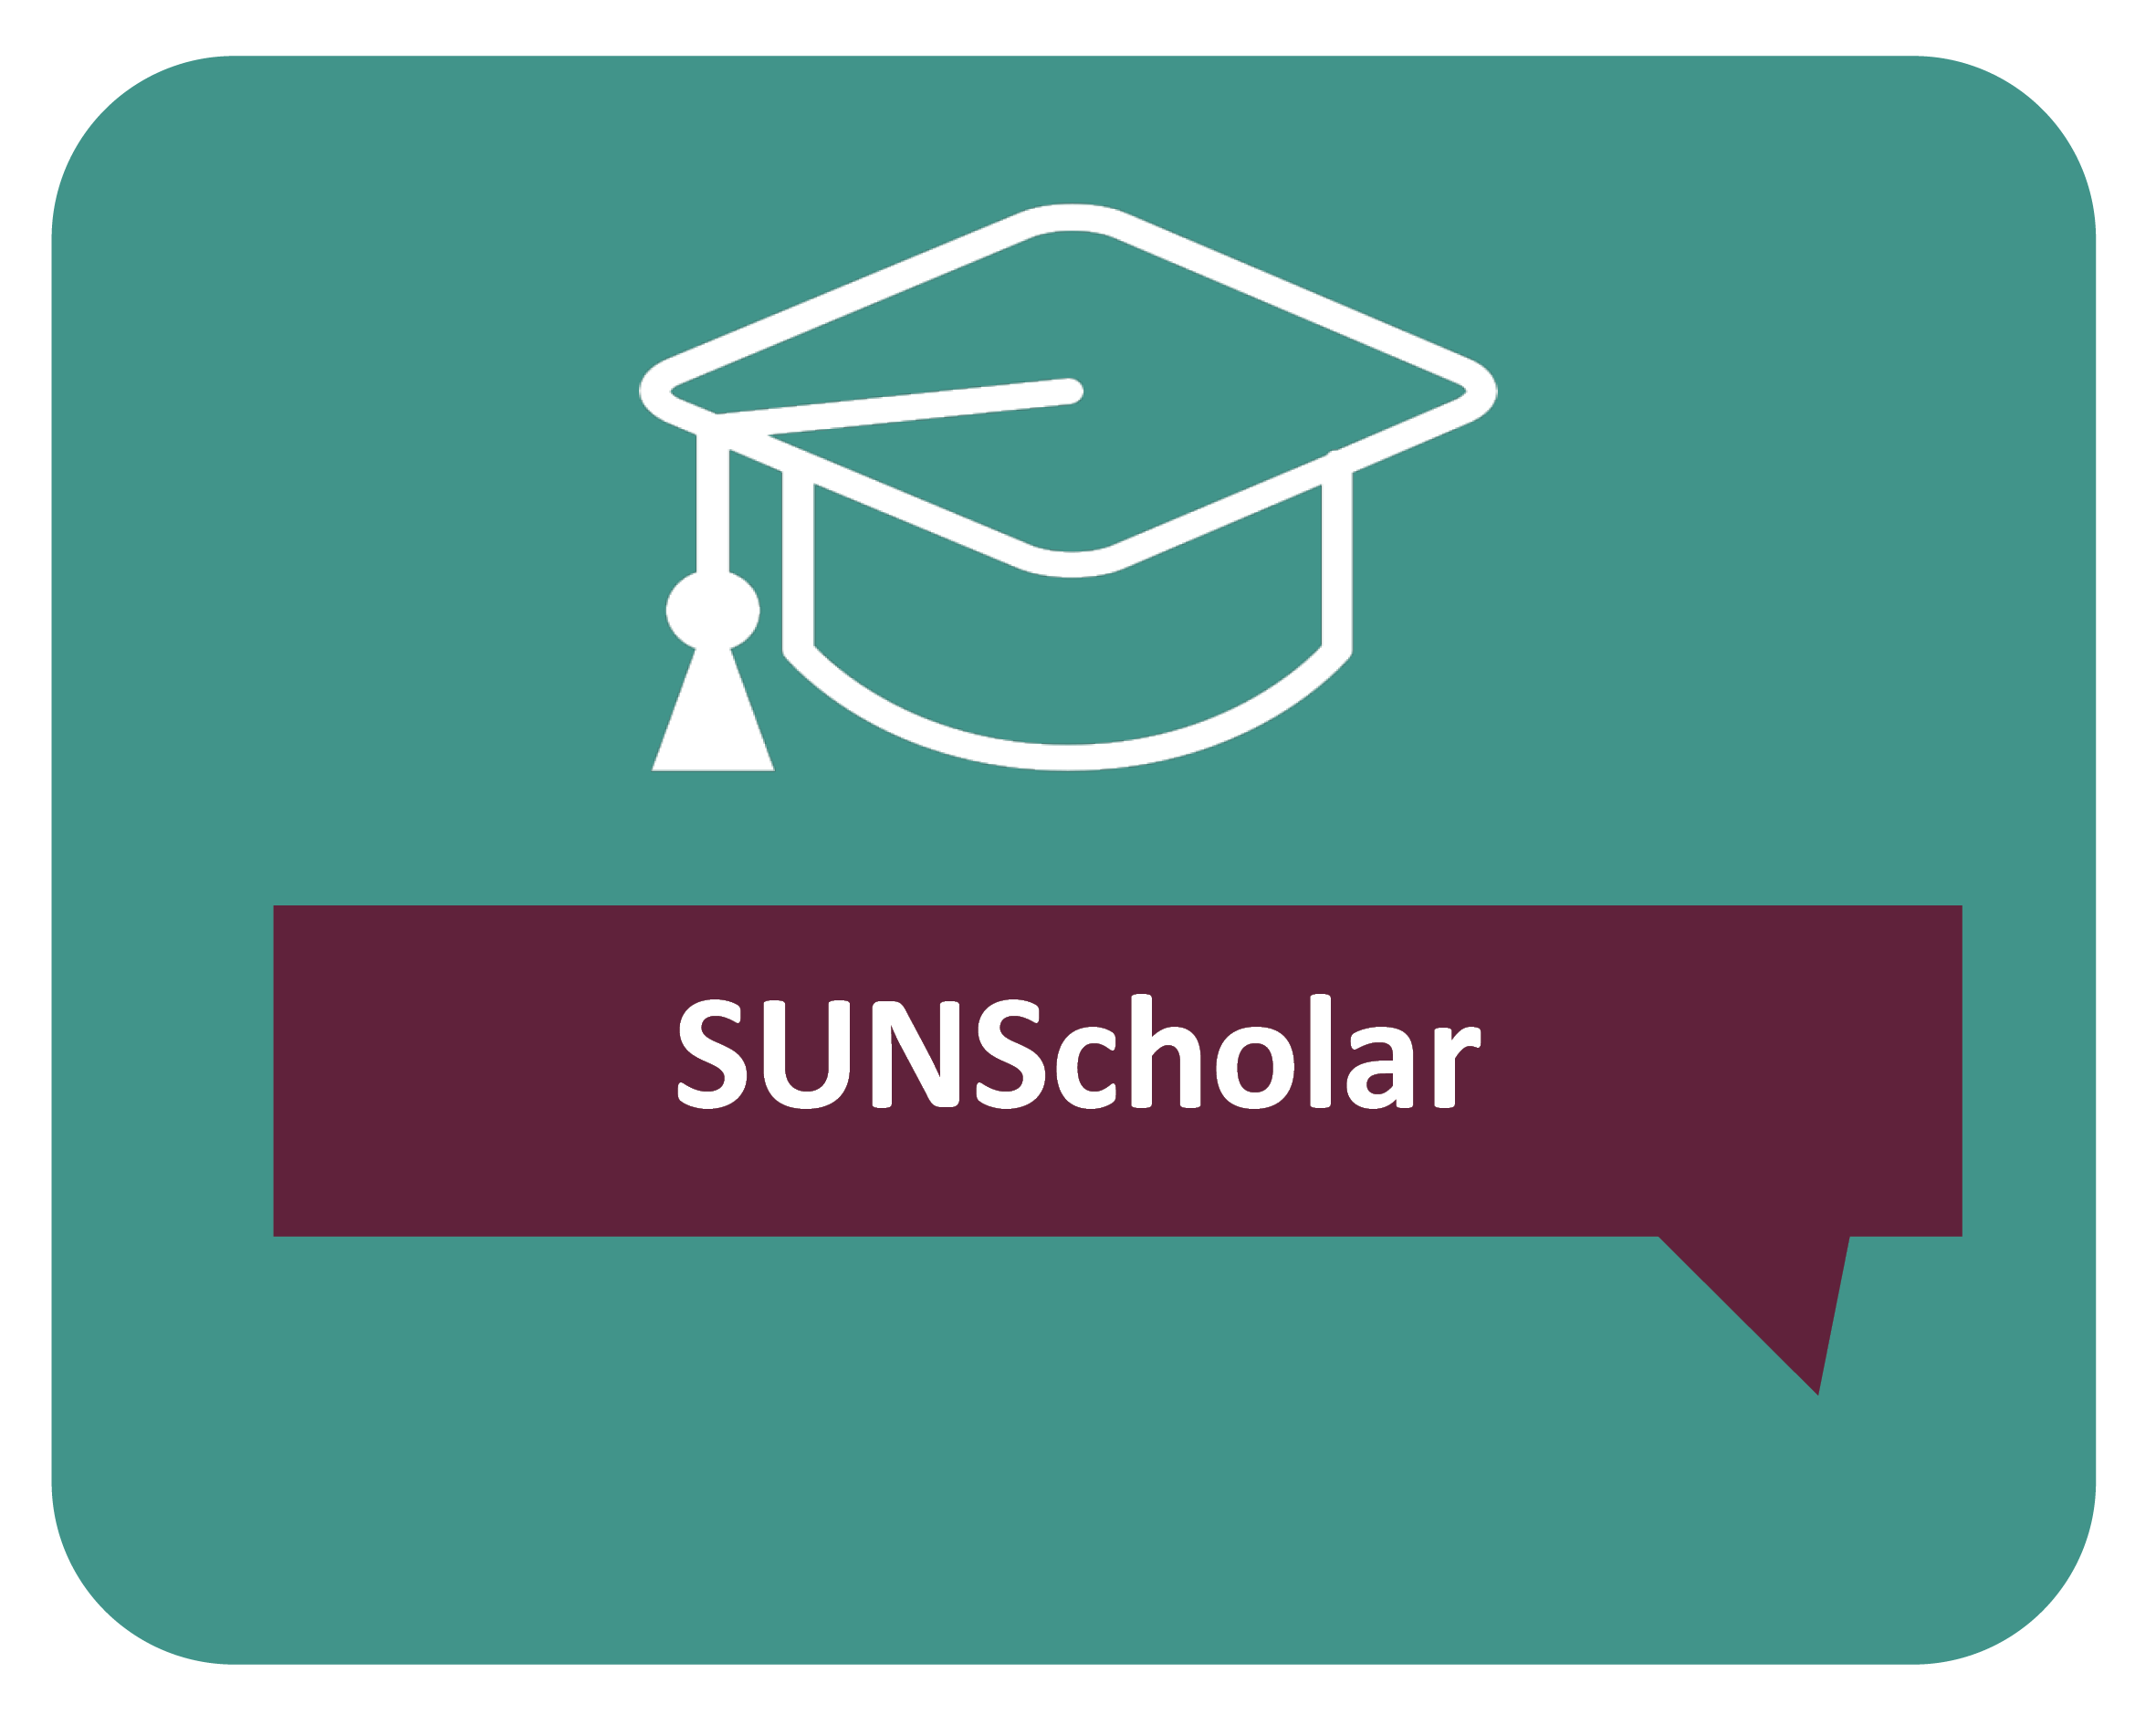 sunscholar icon 1.png